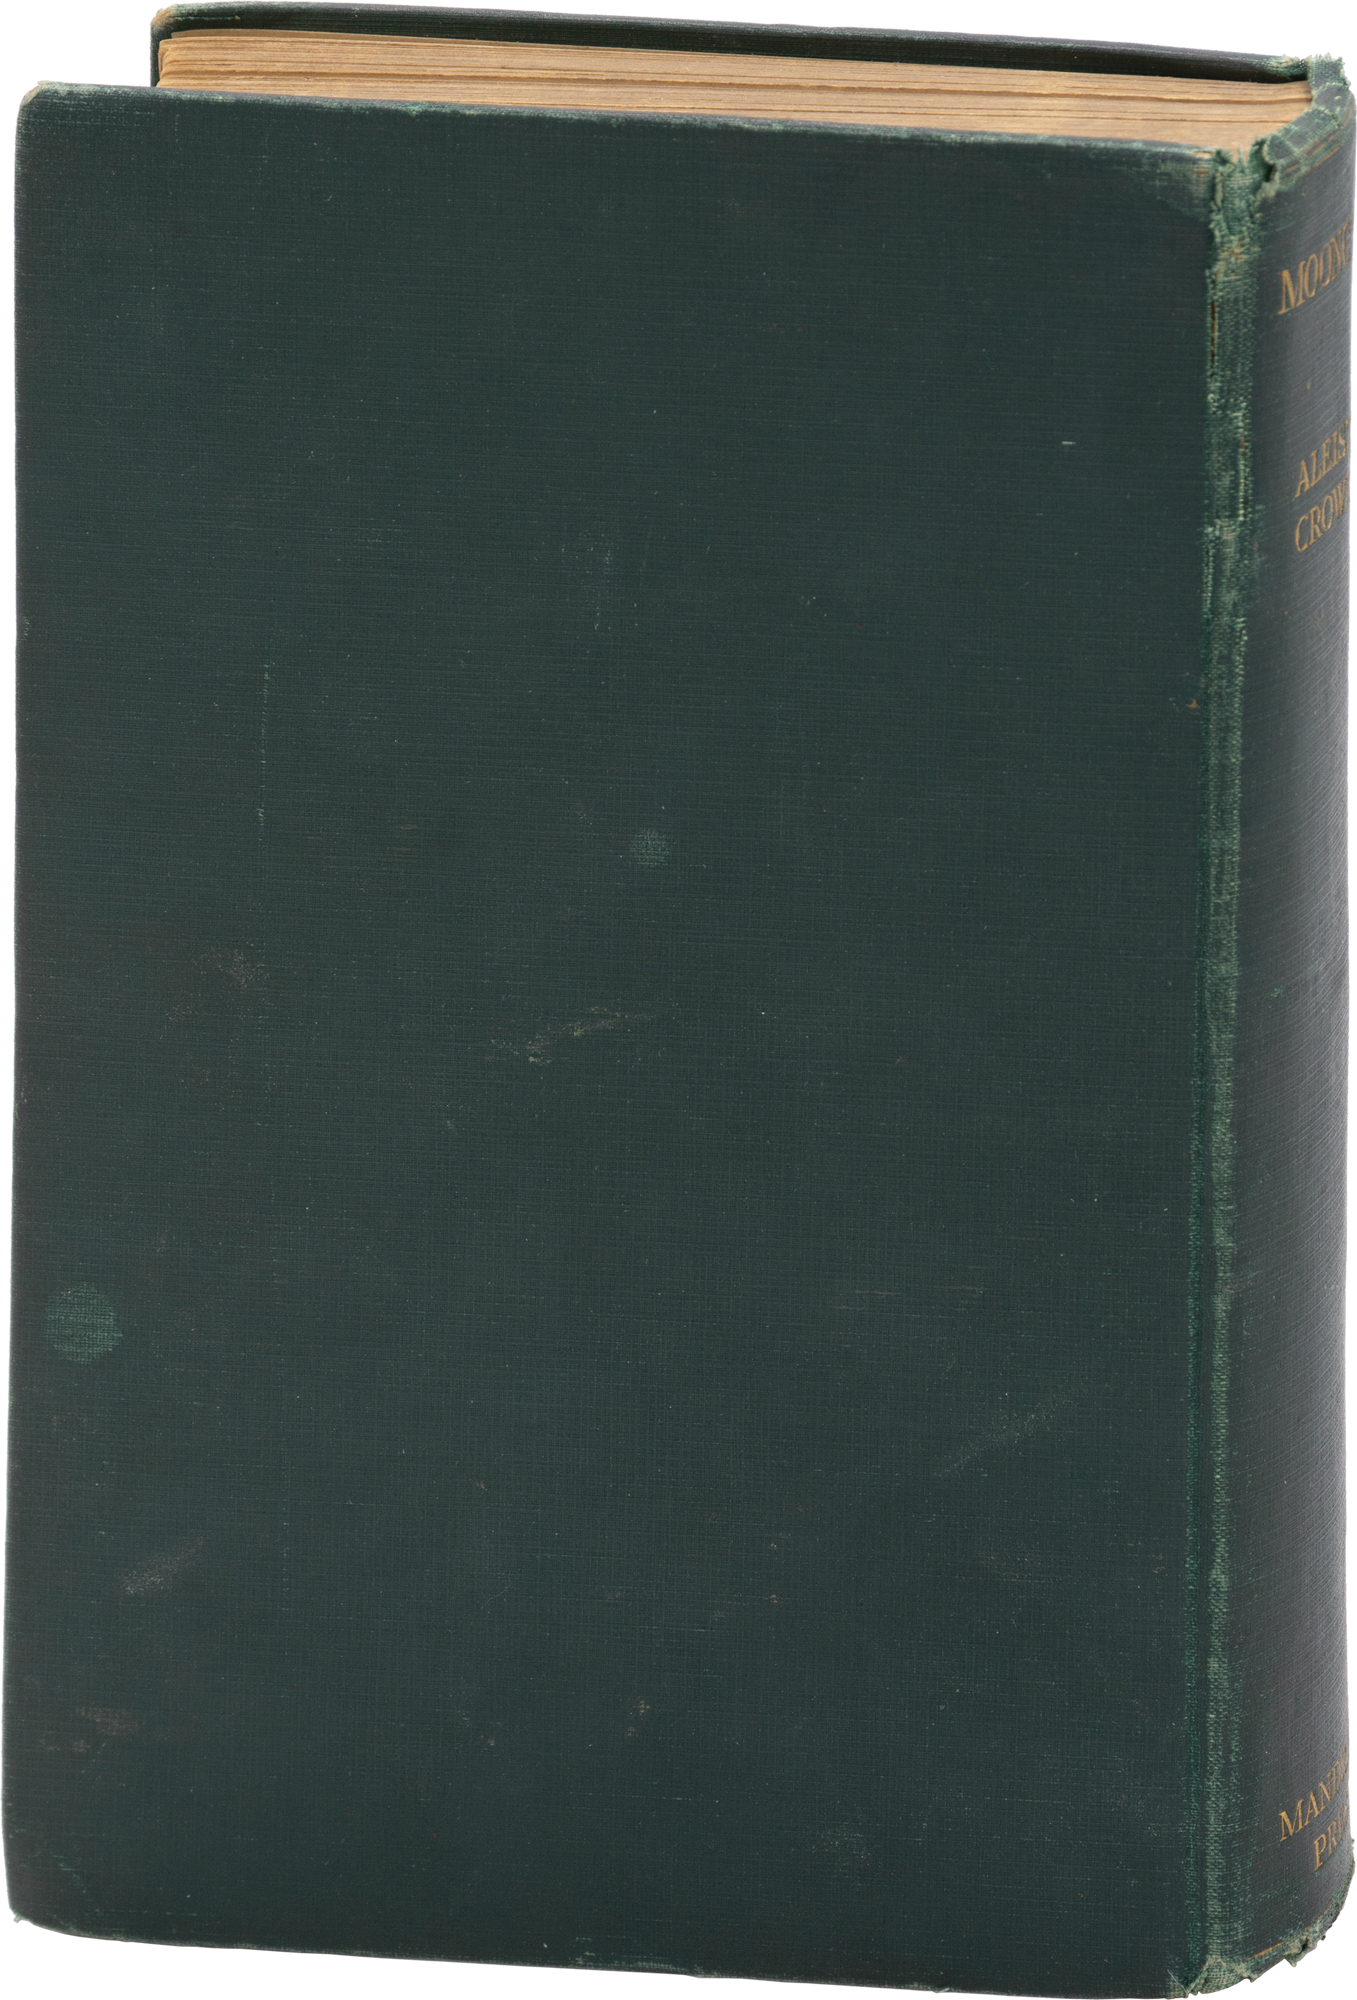 Moonchild (First Edition) de Aleister Crowley: (1929) | Royal Books ...